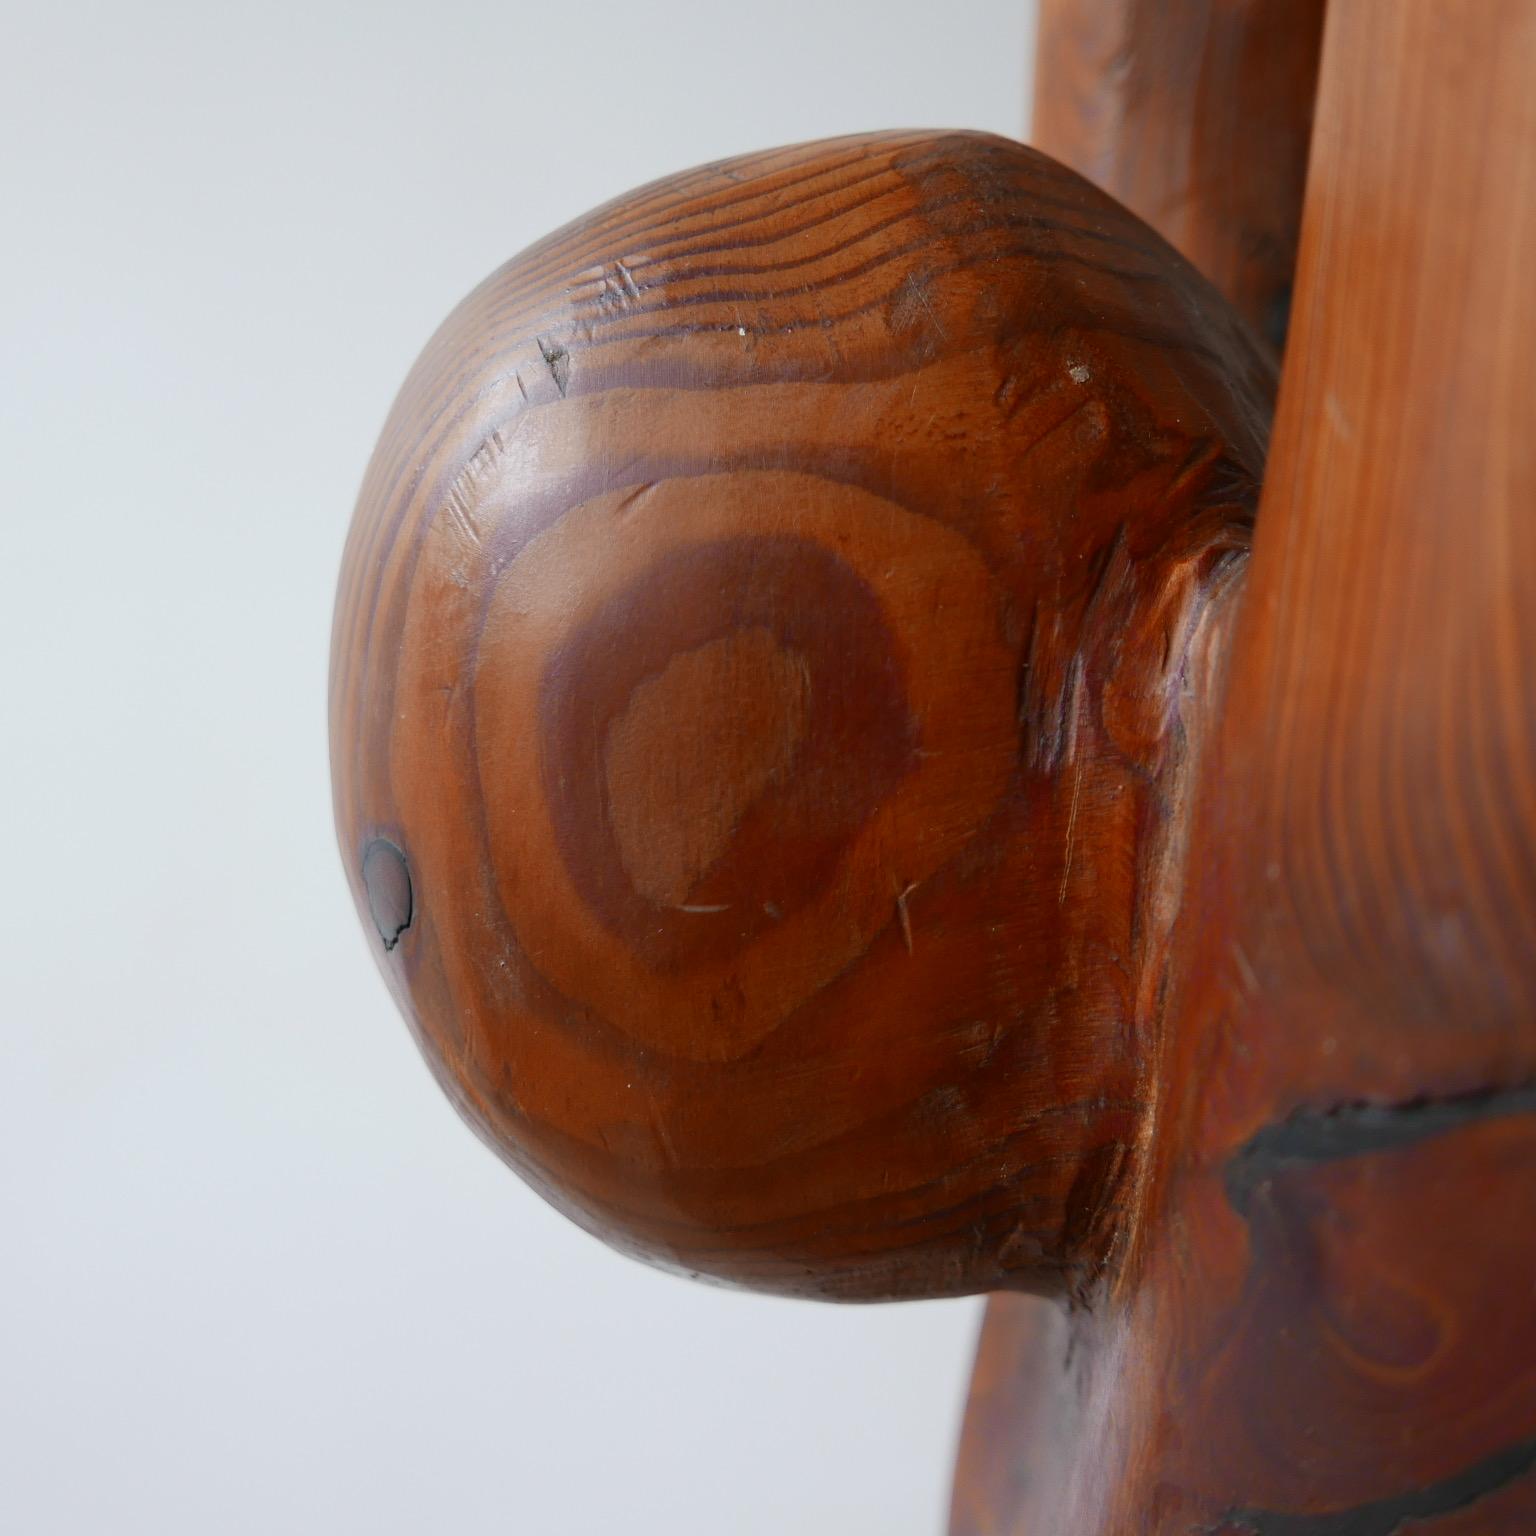 A likely unique midcentury floor lamp.

Formed from a solid carved wood sculptural base with an opaline globe above.

English, circa 1960s.

Likely created by an artist for their own home. It’s not something we have ever come across